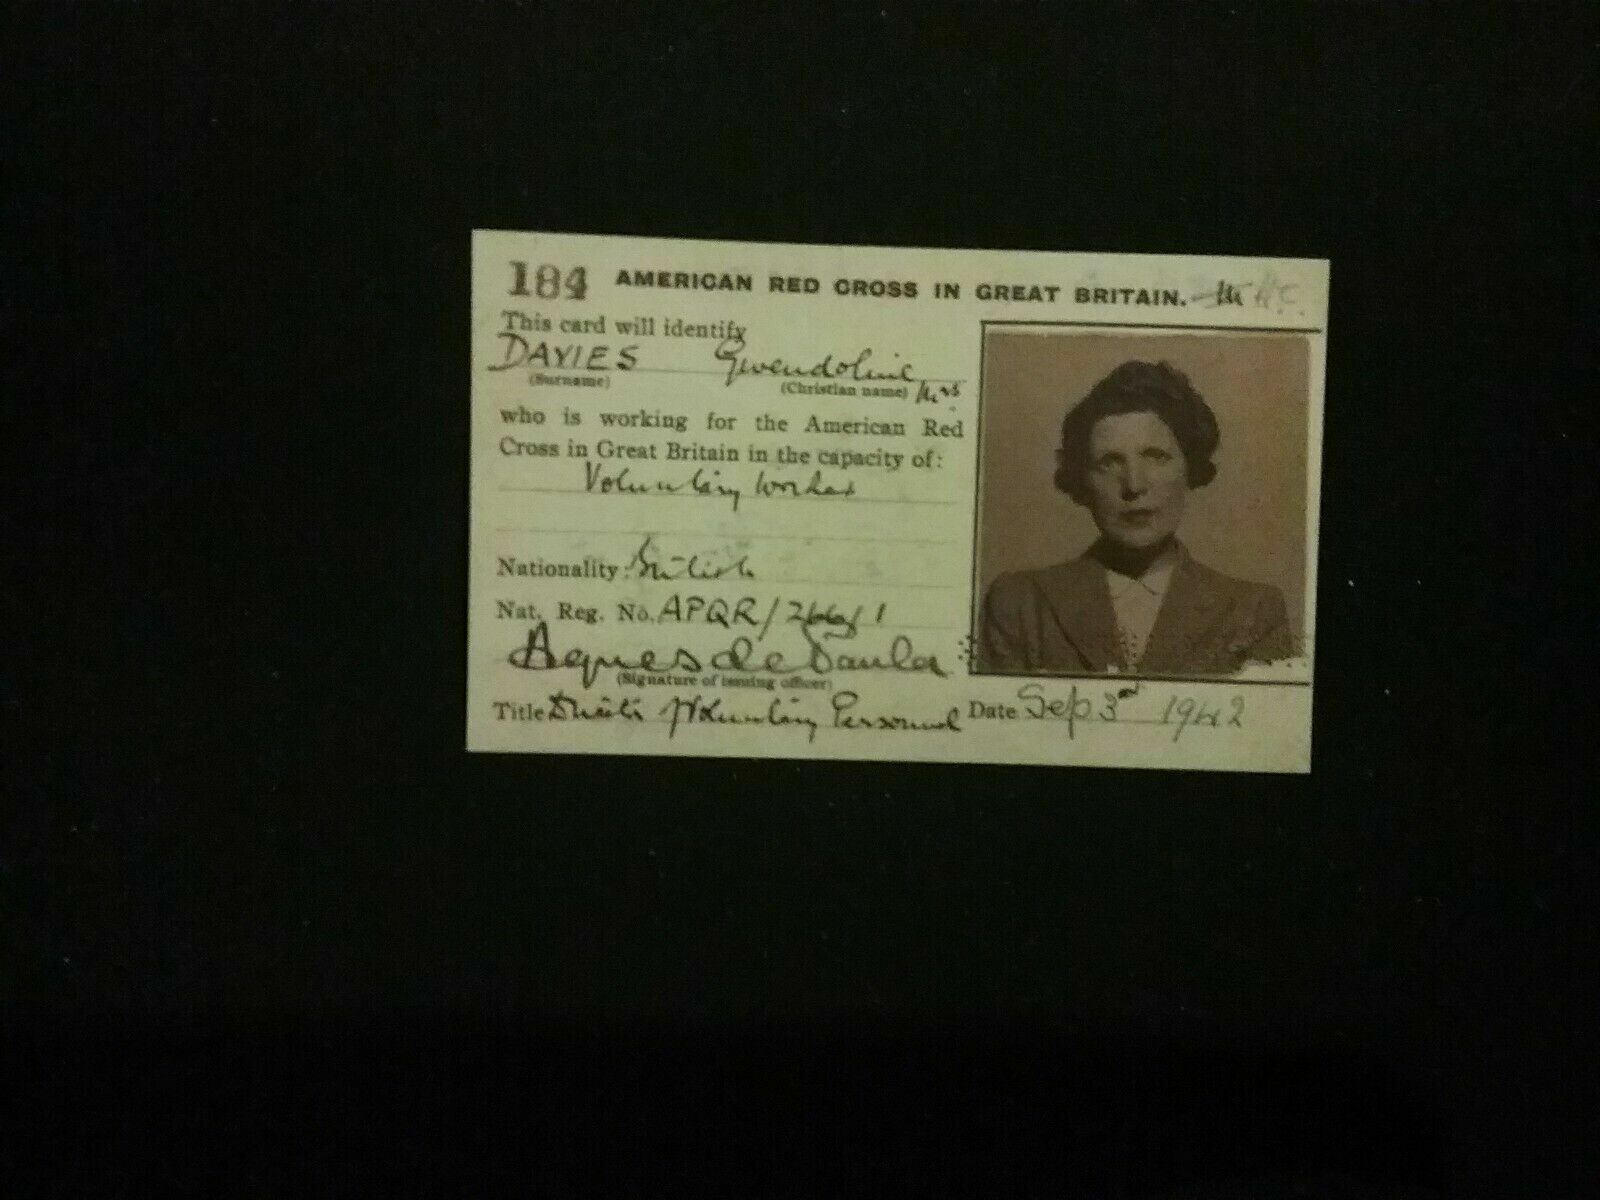 1942 AMERICAN RED CROSS PASS FOR AN AMERICAN WOMAN ON SERVICE IN BRITAIN (Repro)